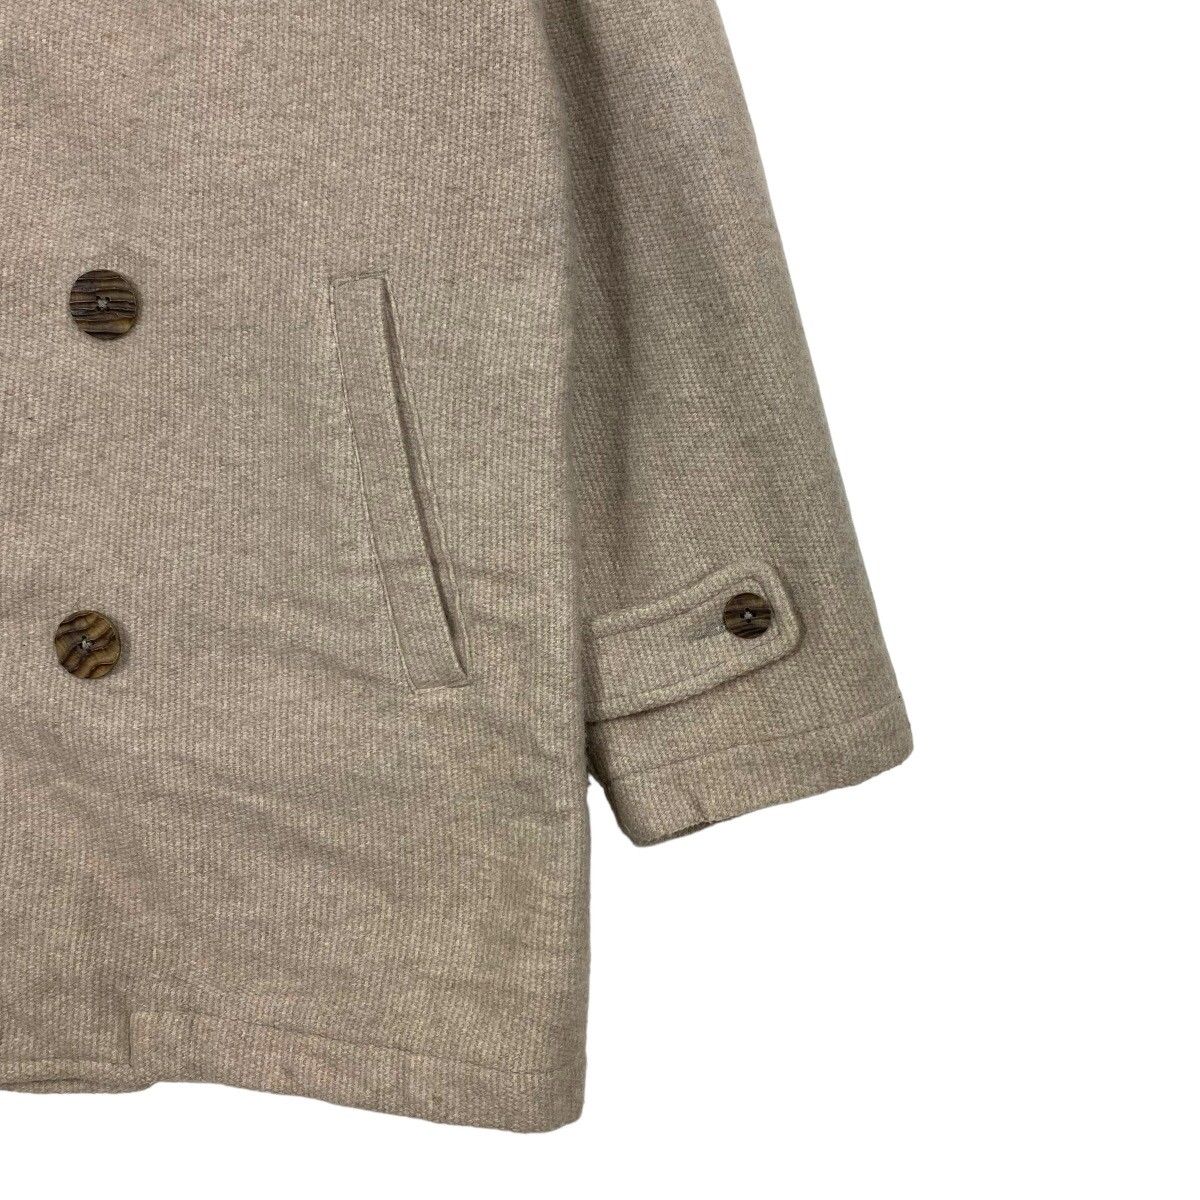 Nigel Cabourn Button Jacket Made In Japan - 7